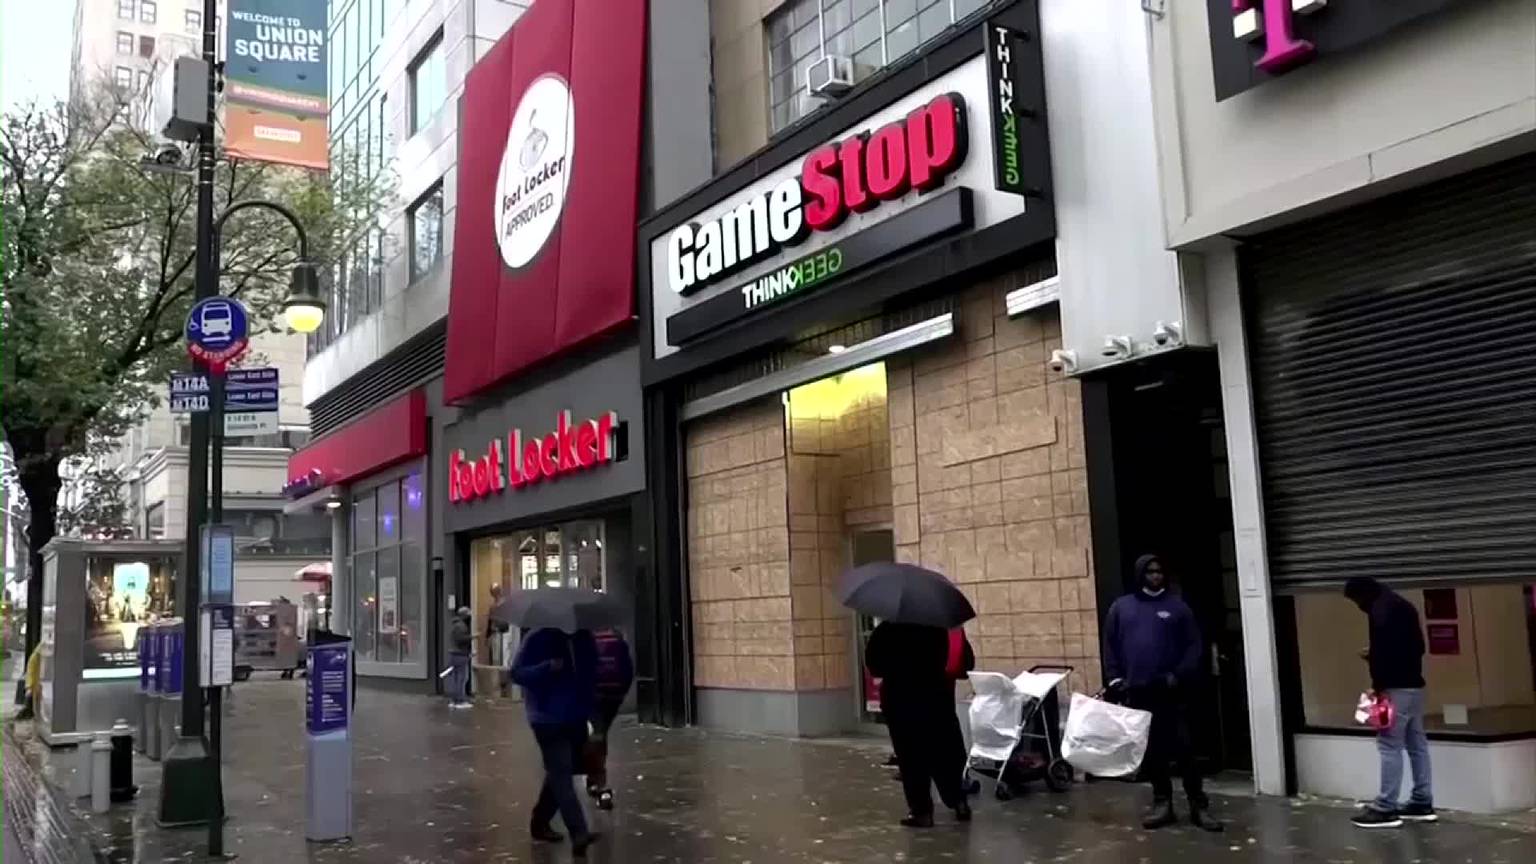 Video: GameStop shares fall amid competition, weak spending [Video]